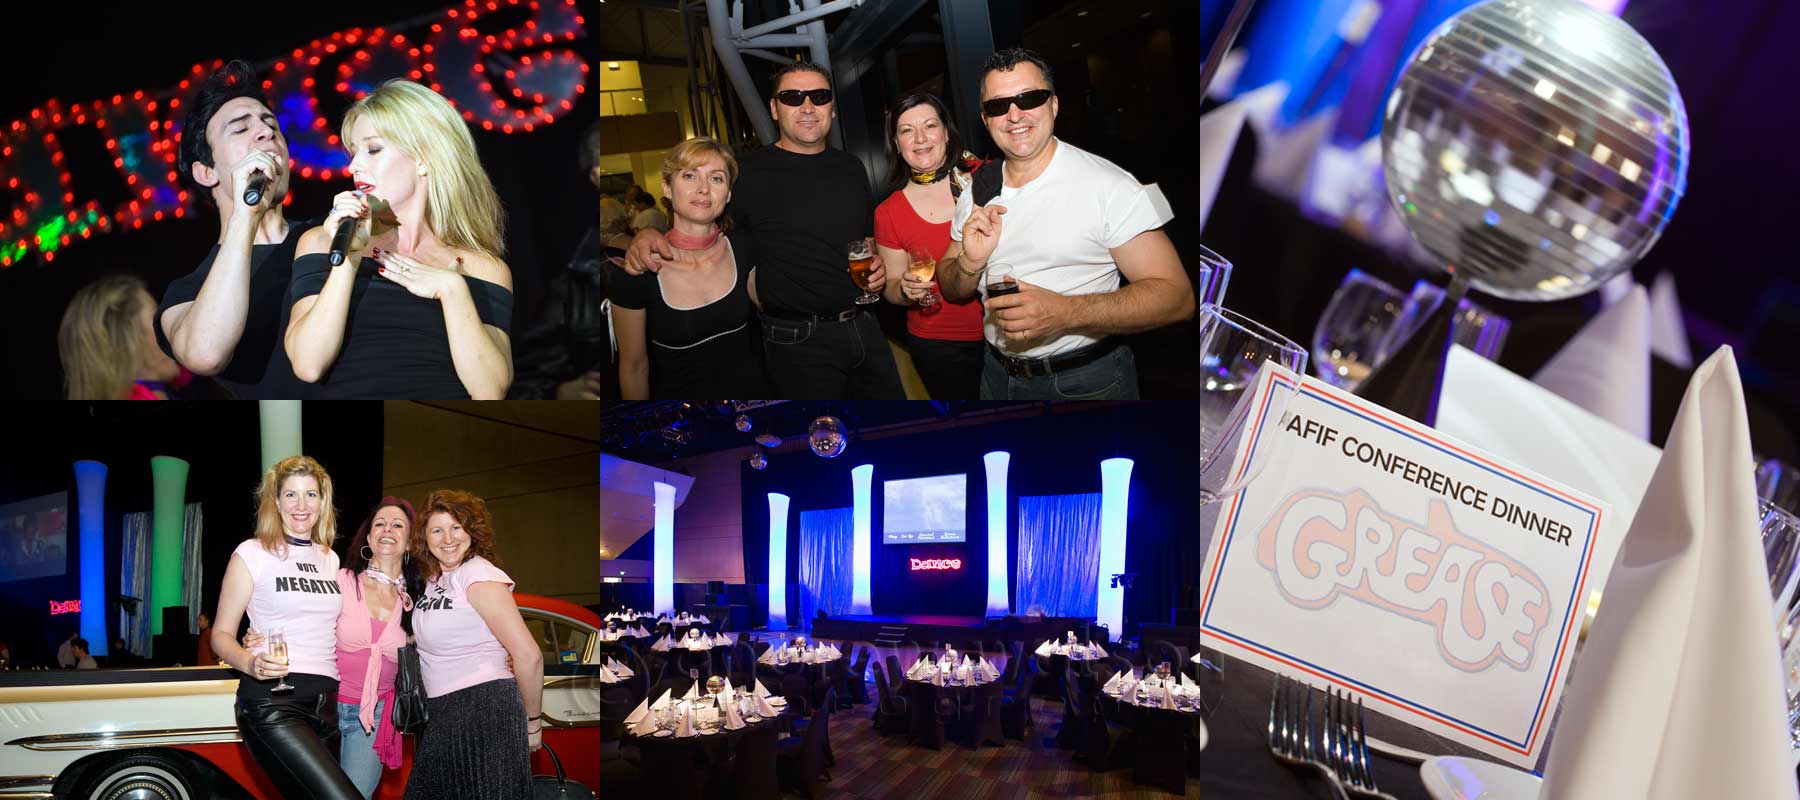 Events Photography - Images captured at AFIF Conference Gala Dinner, Cairns Convention Centre